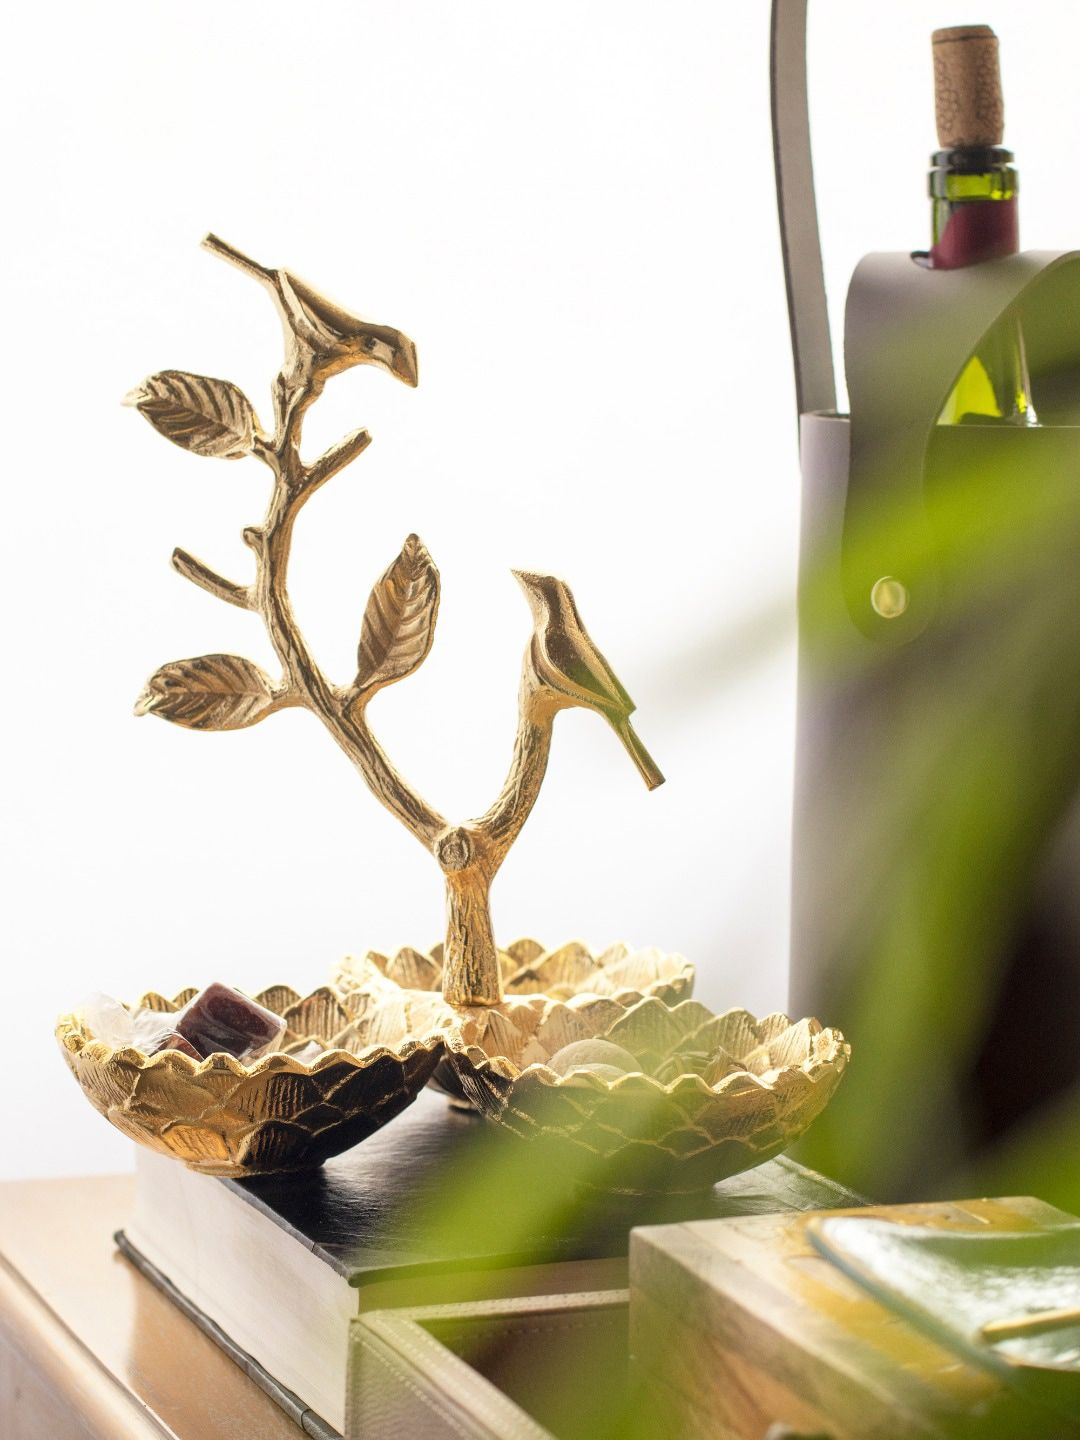 The 7 DeKor Gold-Toned Textured Serveware Price in India